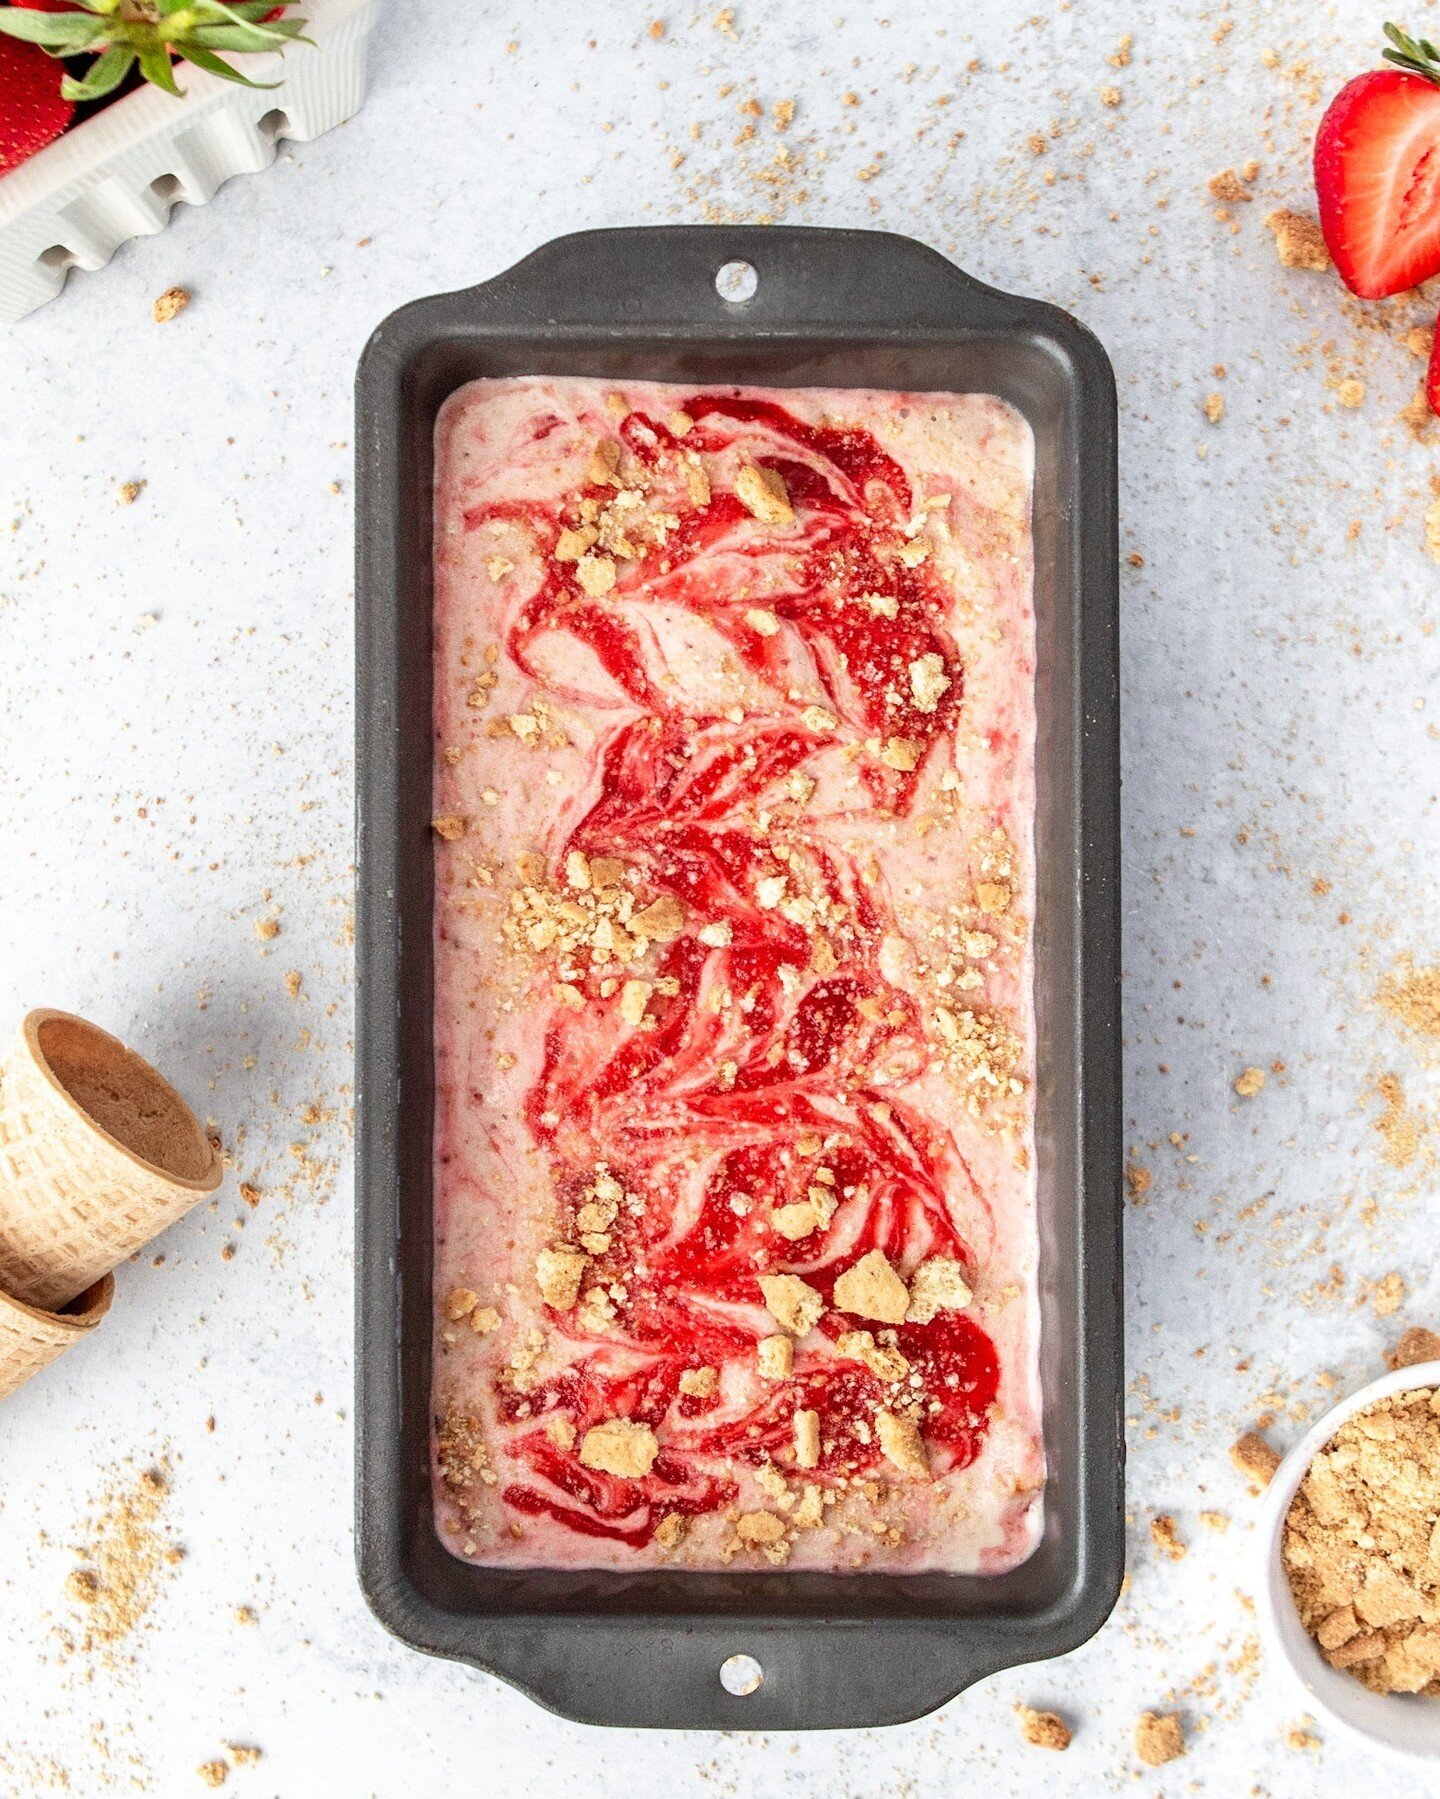 Summer has arrived &amp; I&rsquo;m over here craving allll the [dairy-free] ice cream 🍦☀️ Reminded me of this tasty Vegan Strawberry Cheesecake Ice Cream I whipped up a few years ago 🍓

This recipe is the lazy gals version, using a fresh strawberry